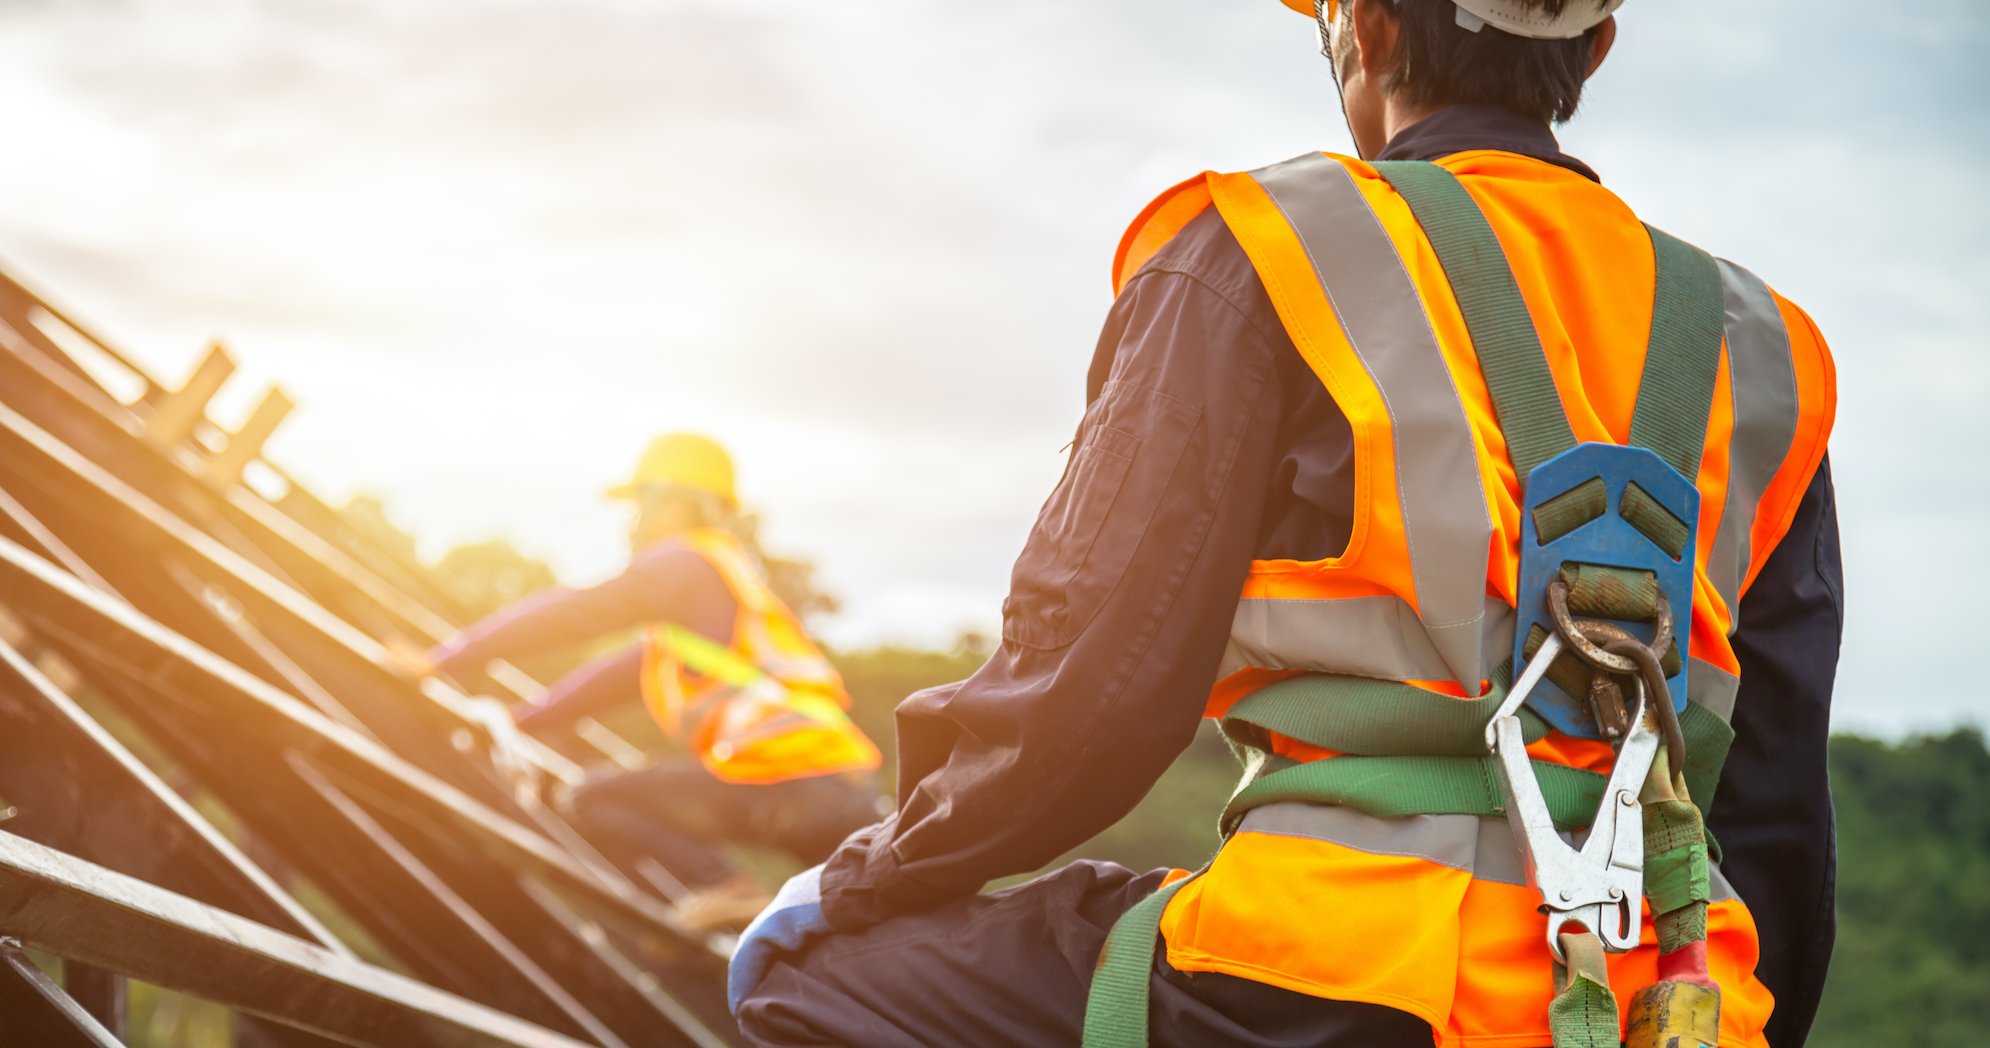 6 Toolbox Talks to have During National Safety Month